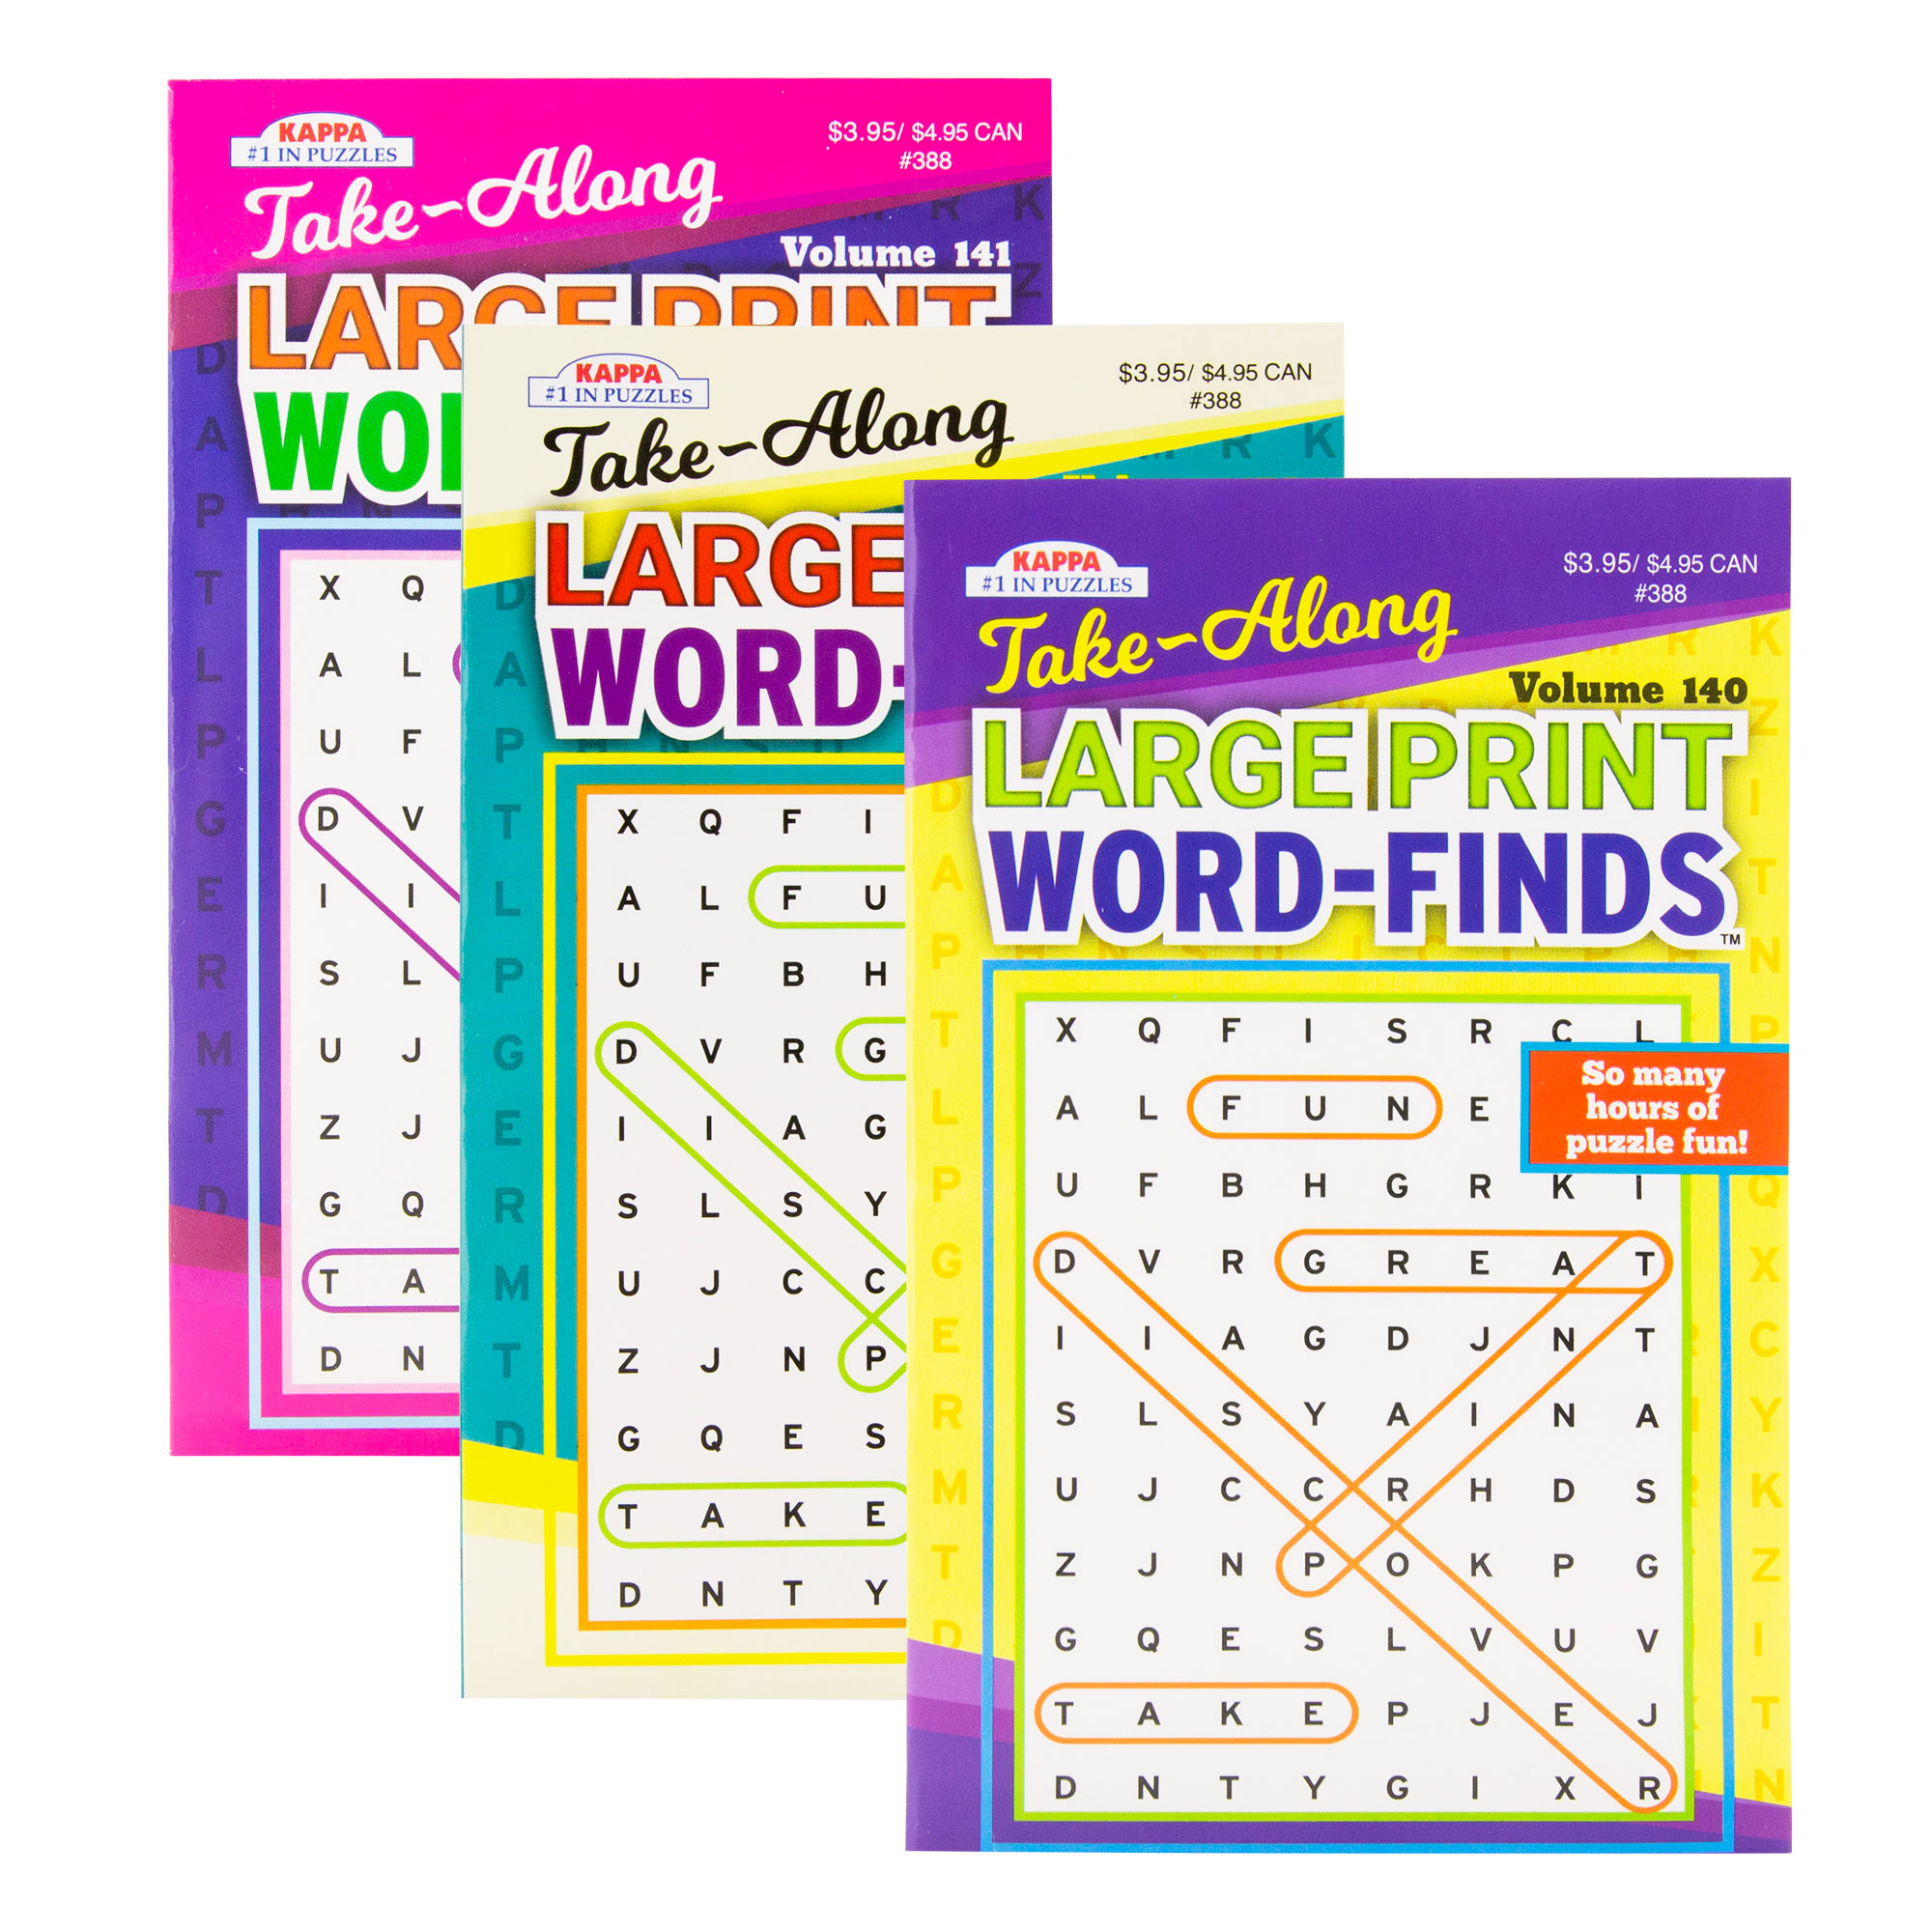 KAPPA Take Along Large Print Word Finds Puzzle Book - 8" x 5" Digest Size 3 Titles, Word Search Find Words Books for Adults Teens, Training Learning with Game, 24-Pack - image 1 of 2